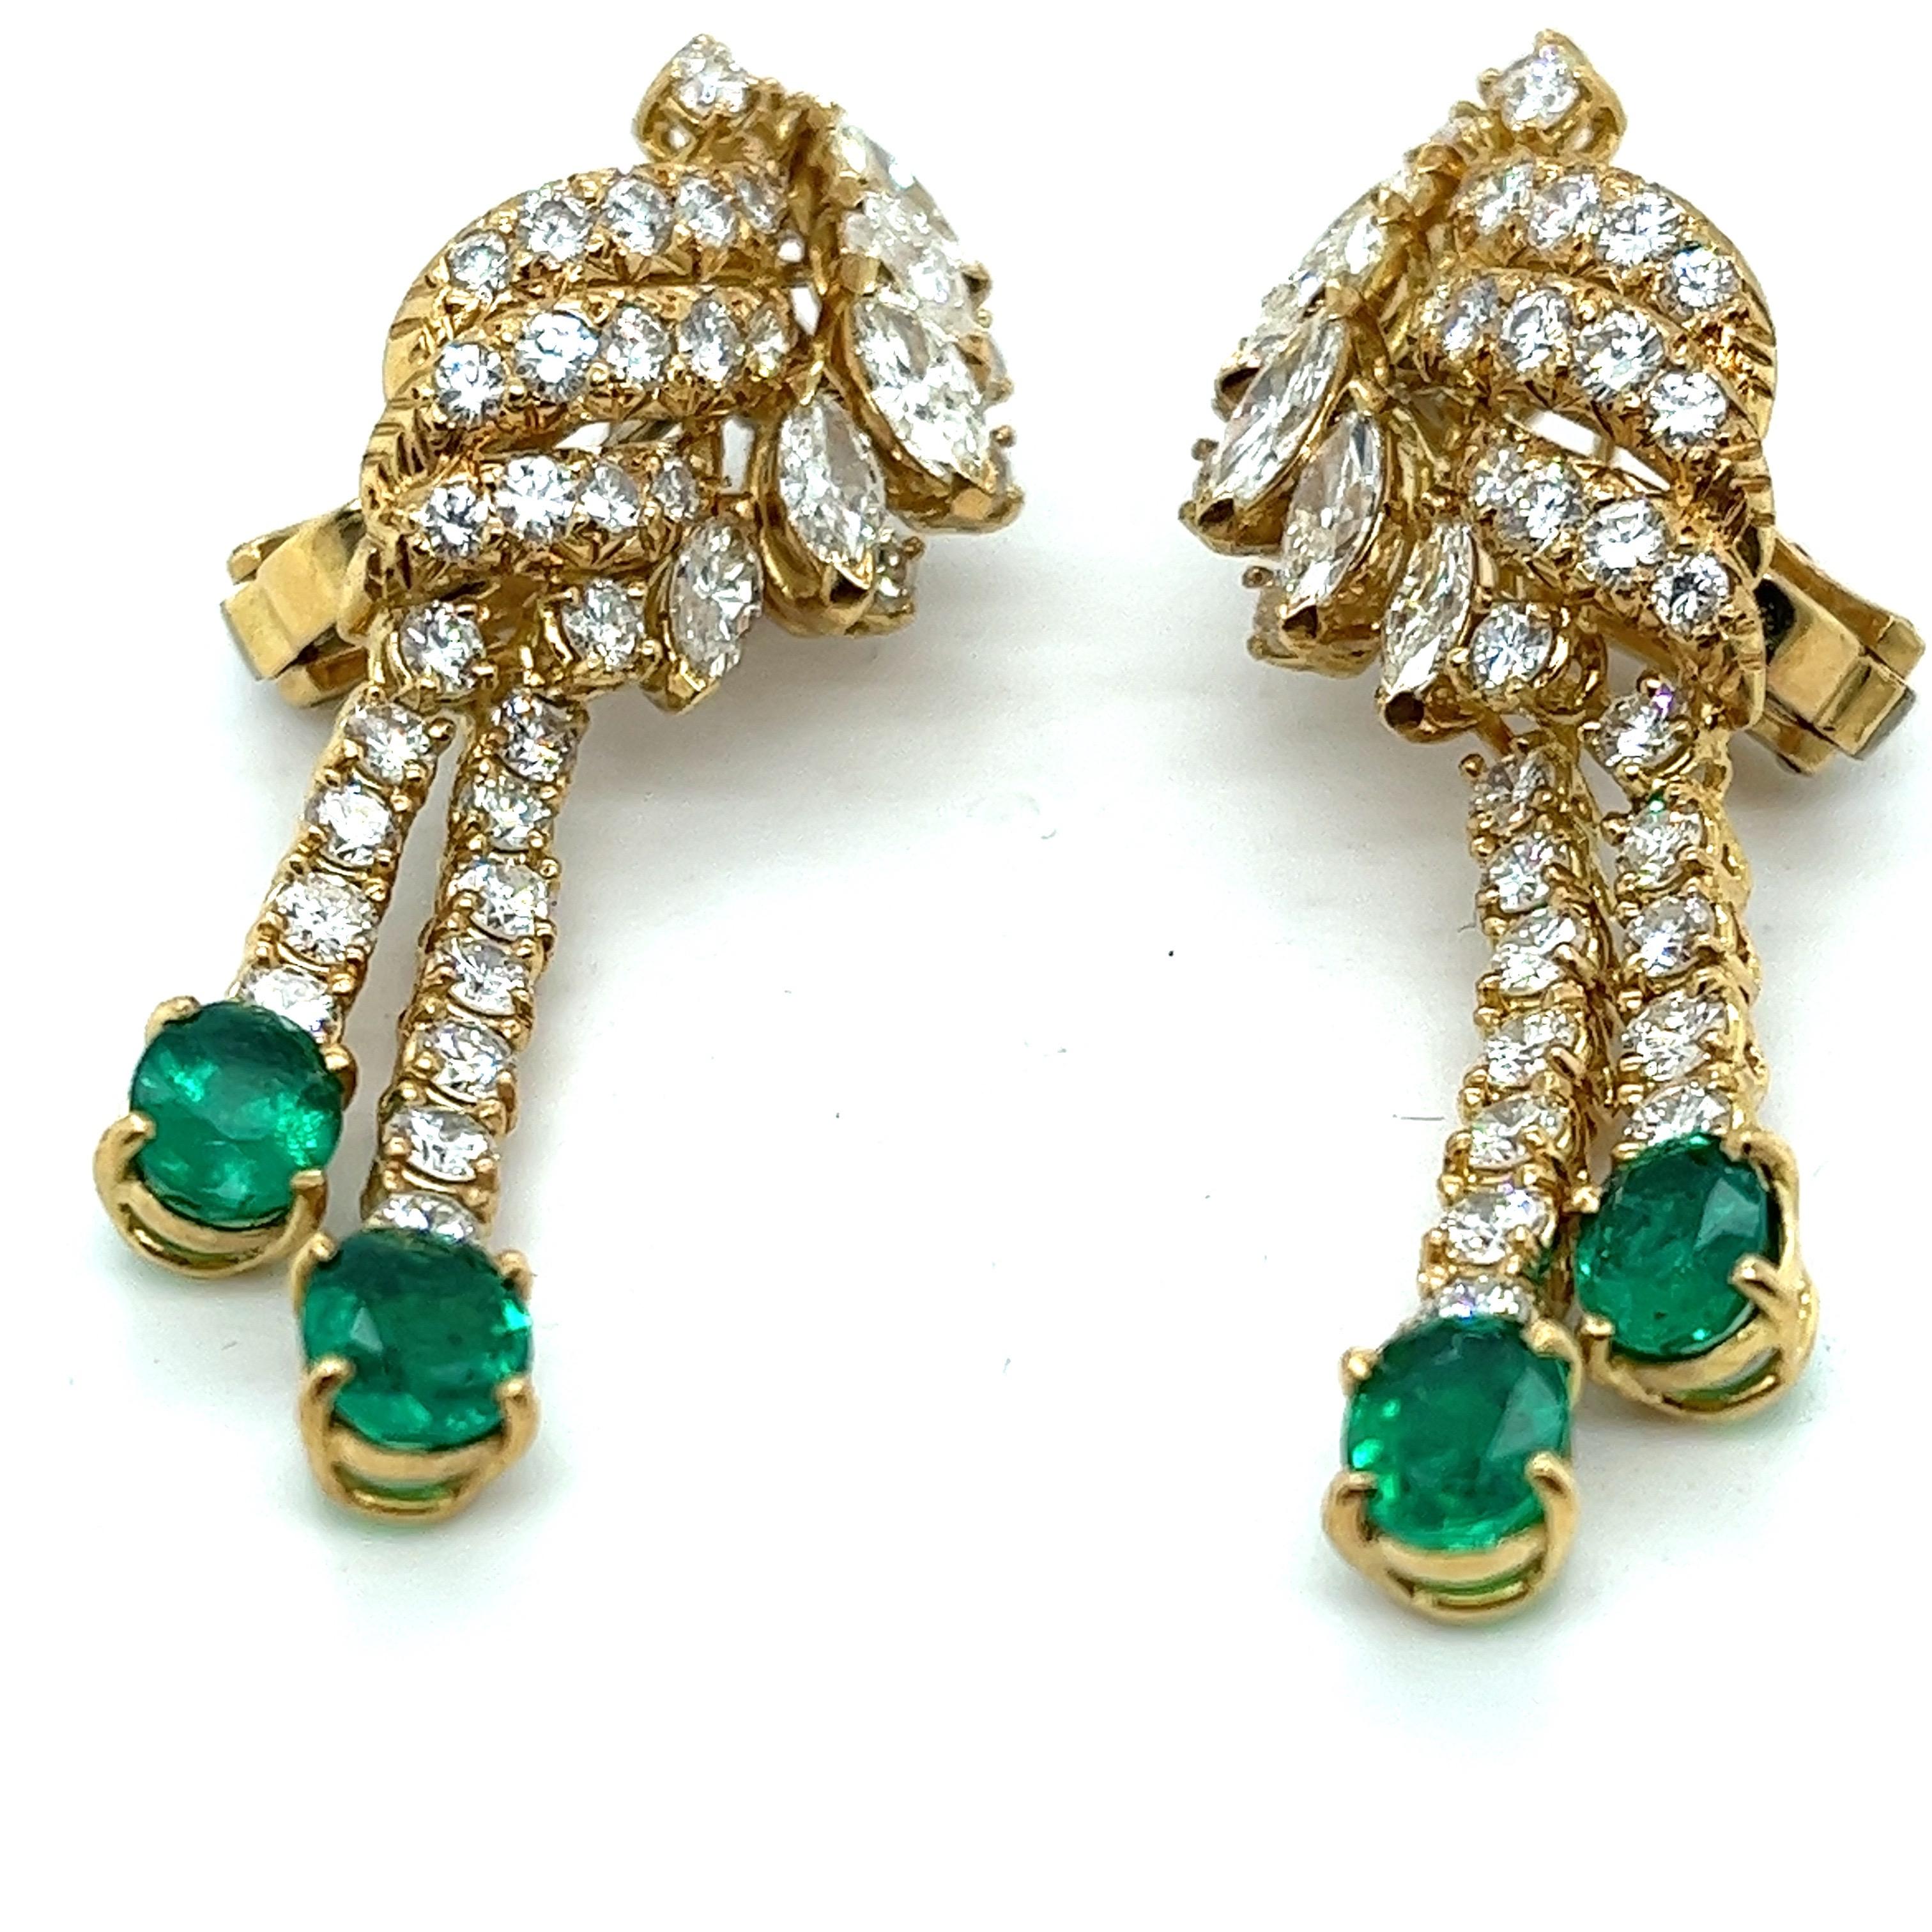 Heirloom 9.75 Carats Diamond Emerald Waterfall Earring, 18kt Italy, 1970's For Sale 2